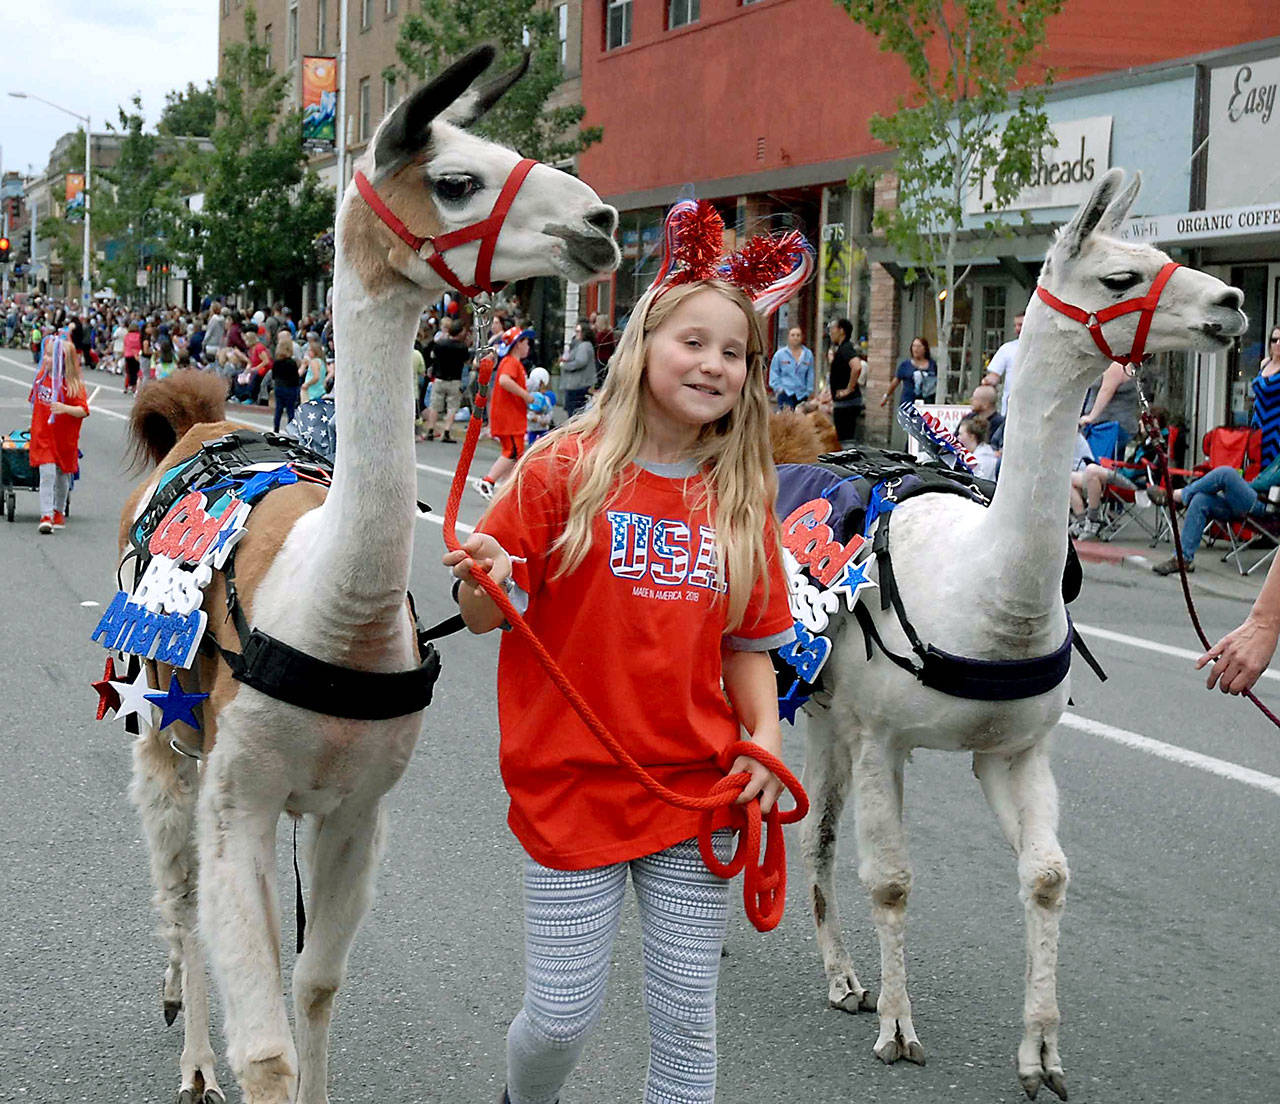 Ameris Hagen, 12, is flanked by llamas Diffn, left, and Fluente during the 2018 parade in Port Angeles. (Keith Thorpe/Peninsula Daily News)